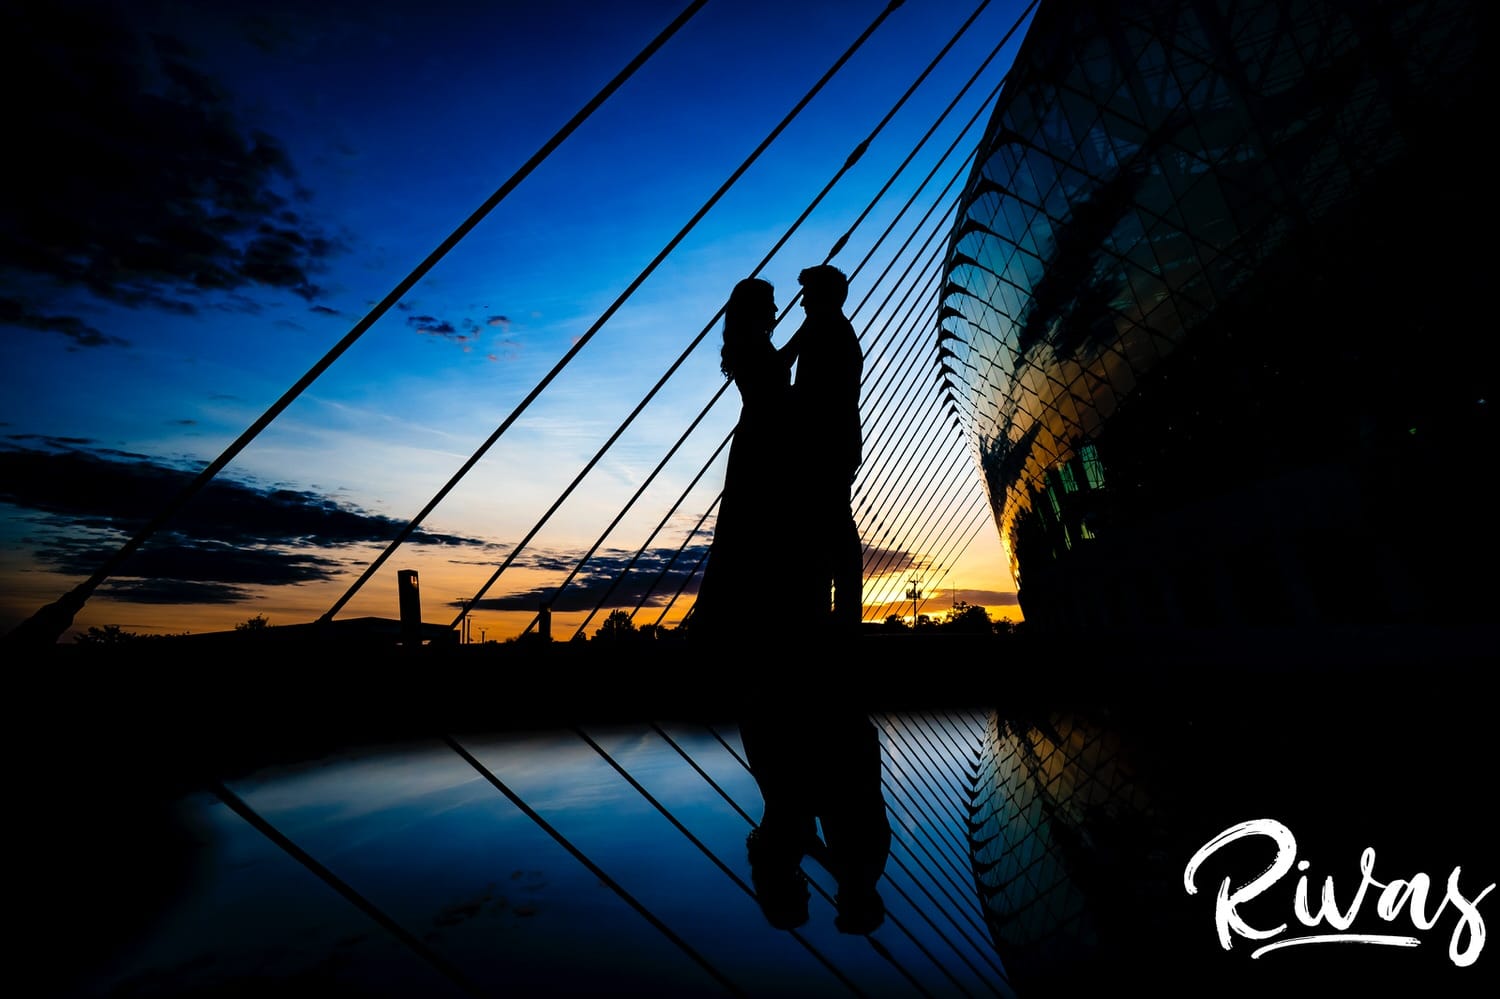 A vibrant, silhouette of an engaged couple sharing an embrace at sunset outside the Kauffman Center in Kansas City, their reflection visible on the ground beneath them. 